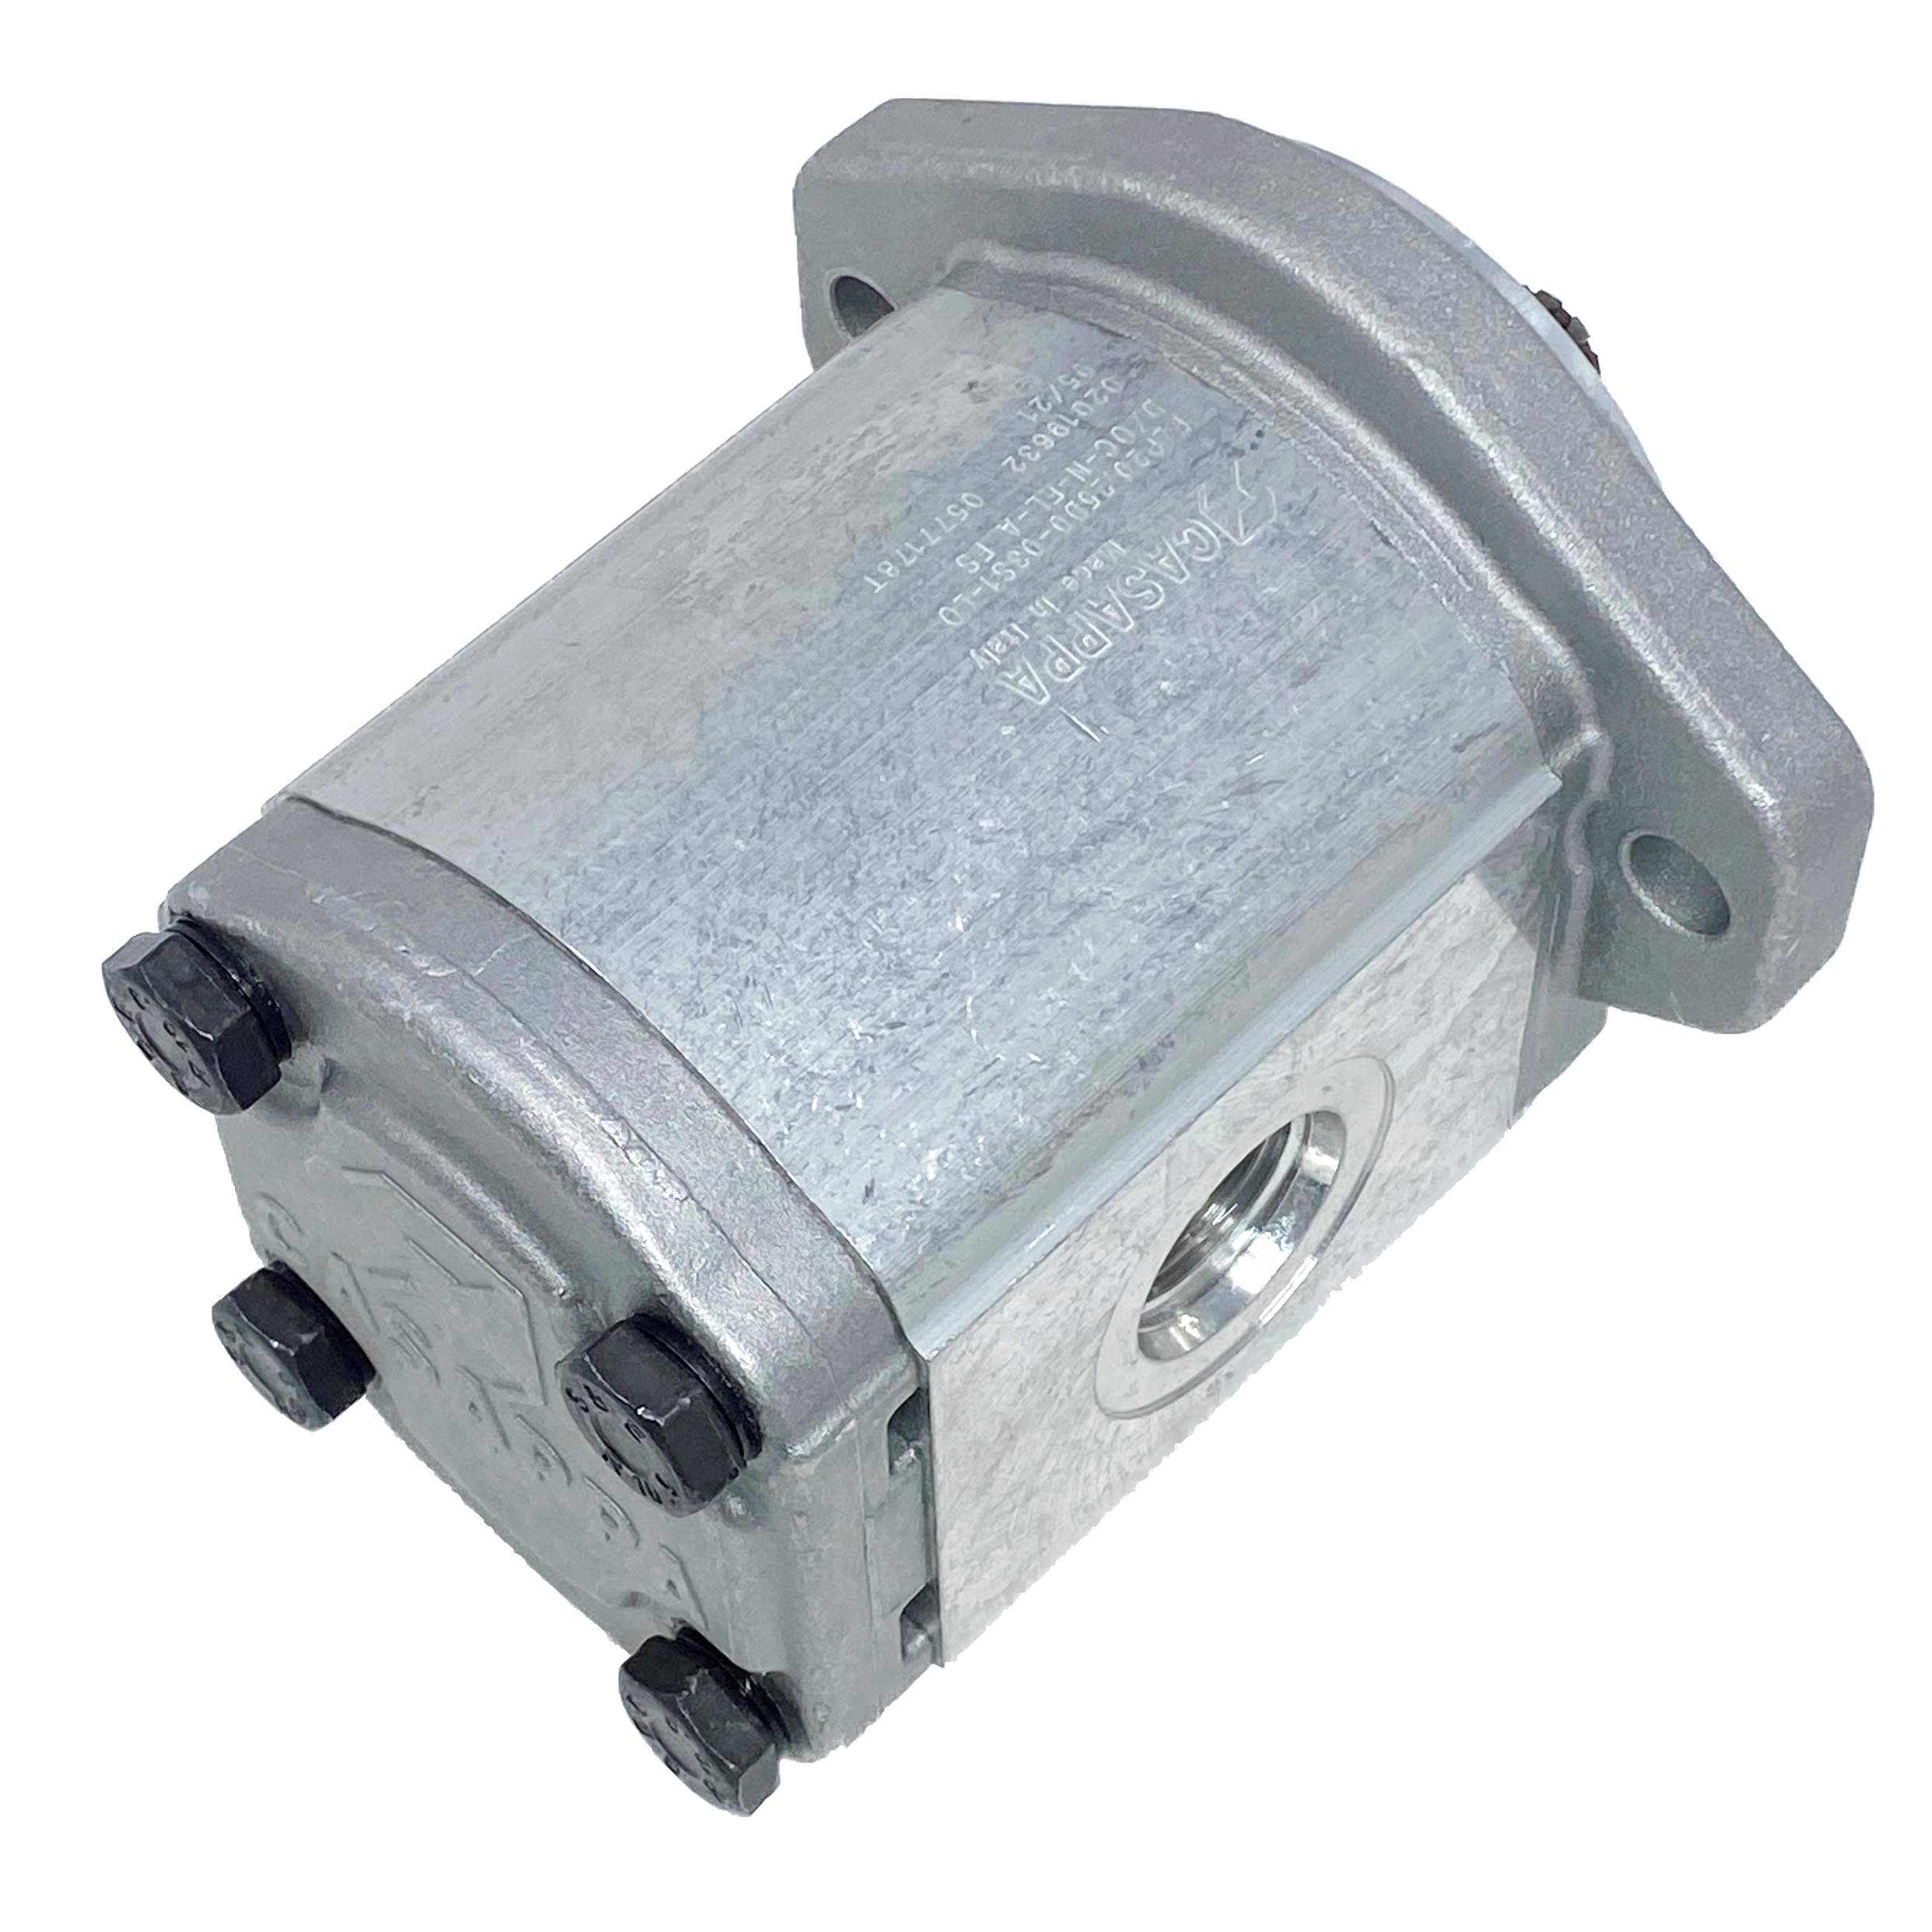 PHP20.27,8S0-07S9-LOG/OC-N-EL : Casappa Polaris Gear Pump, 28.21cc, 2900psi Rated, 2500RPM, CCW, 11T 16/32dp Shaft, SAE A 2-Bolt Flange, 1.25" #20 SAE Inlet, 0.625 (5/8") #10 SAE Outlet, Cast Iron Body, Aluminum Flange